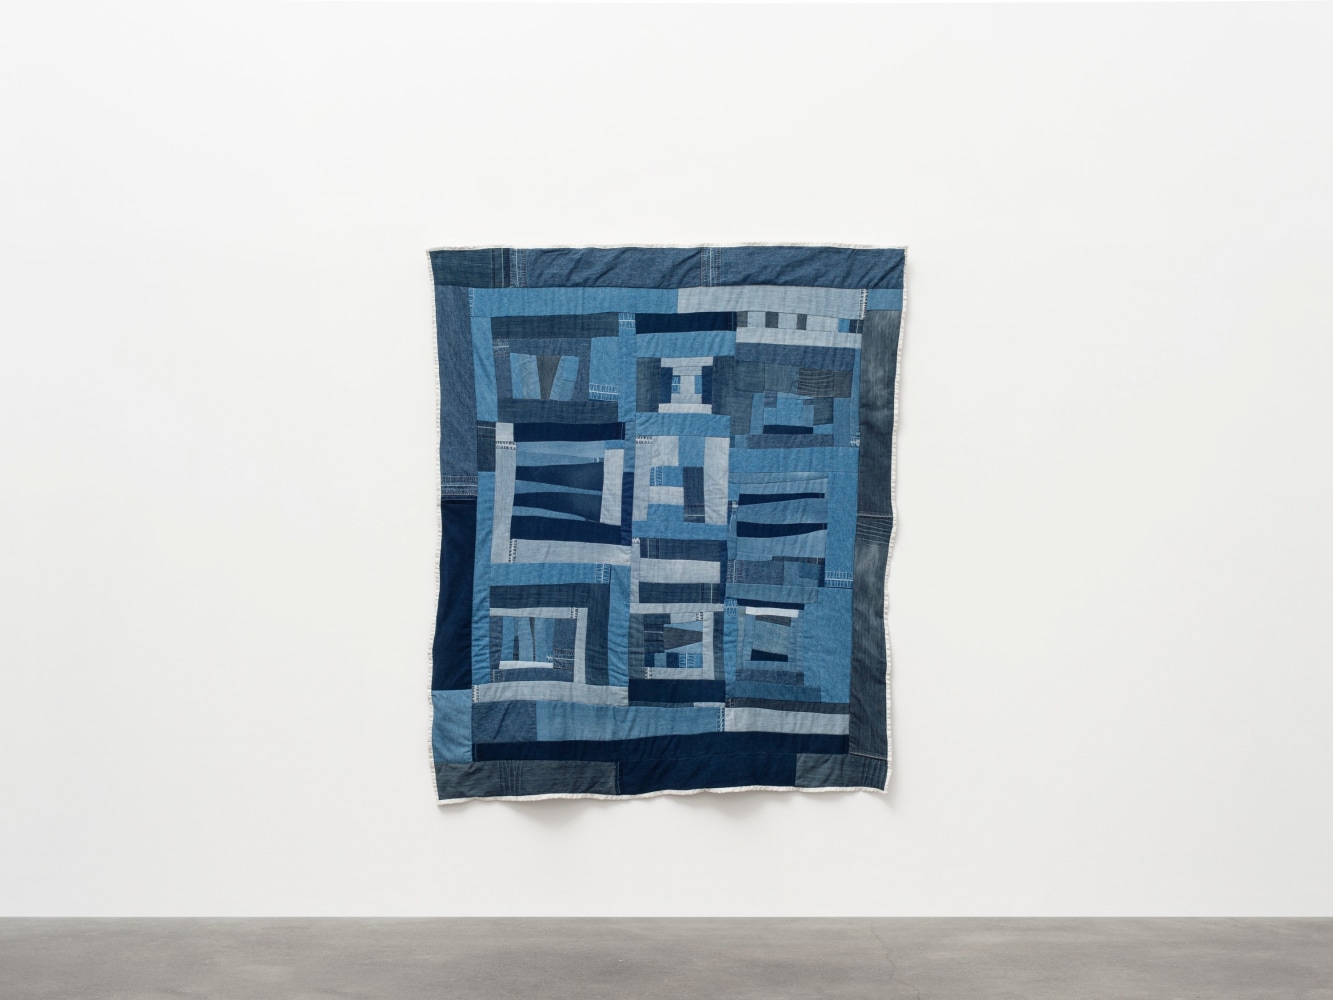 Loretta Pettway Bennett
Human&amp;#39;s Jeans, 2019-20
Denim
75 x 67 inches
(190.5 x 170.2 cm)
&amp;copy; 2024 Loretta Pettway Bennett / Artists Rights Society (ARS), New York. Photo: Michael Brzezinski.
Courtesy the Artist, Alison Jacques, London, and Luhring Augustine, New York.